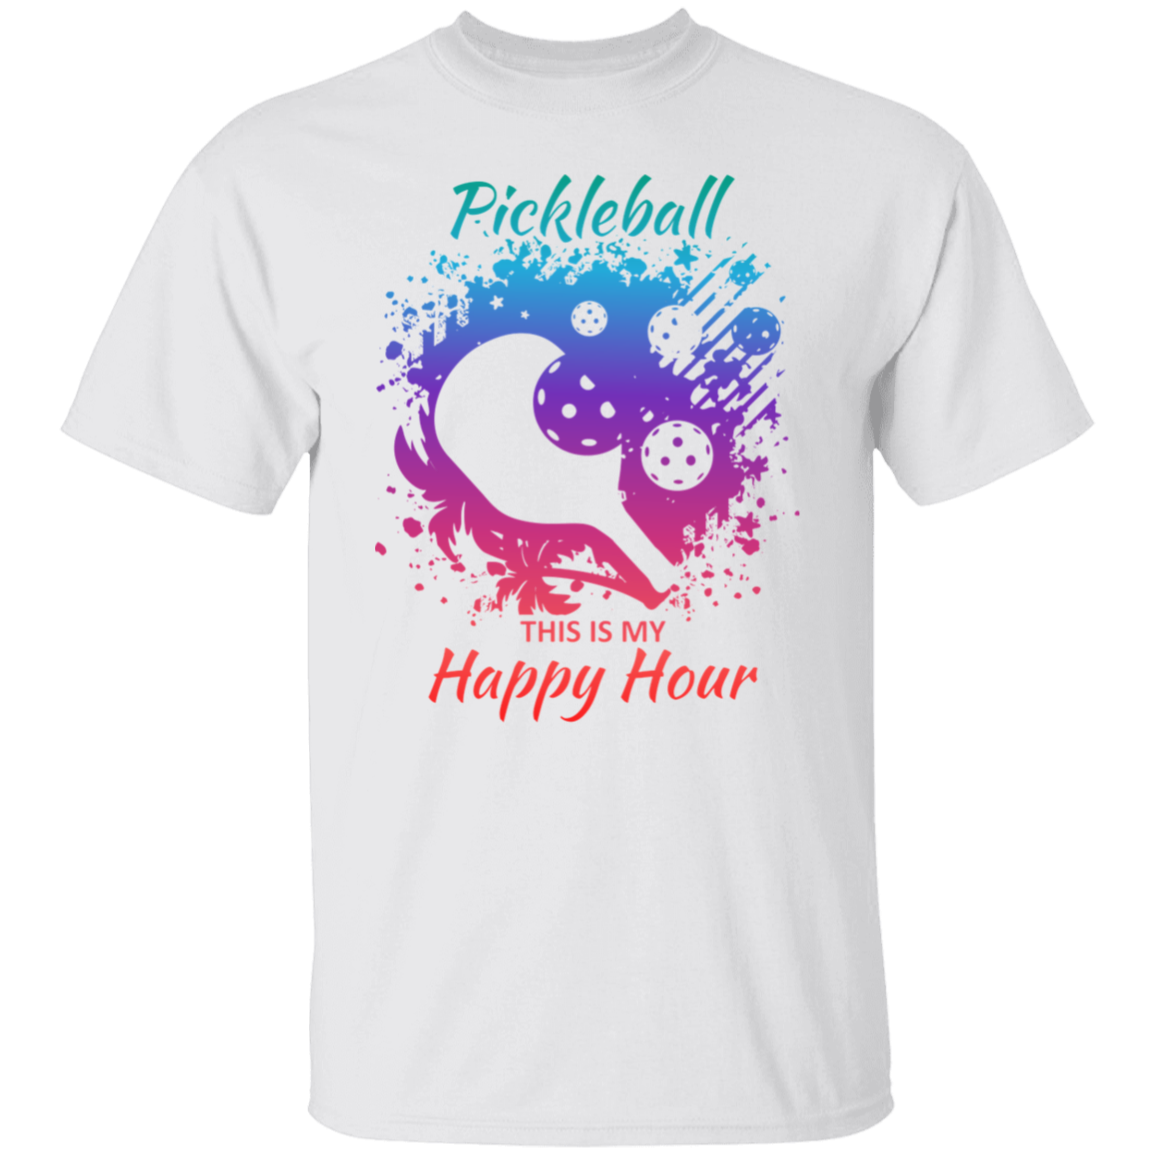 Pickleball is my Happy Hour T-Shirt